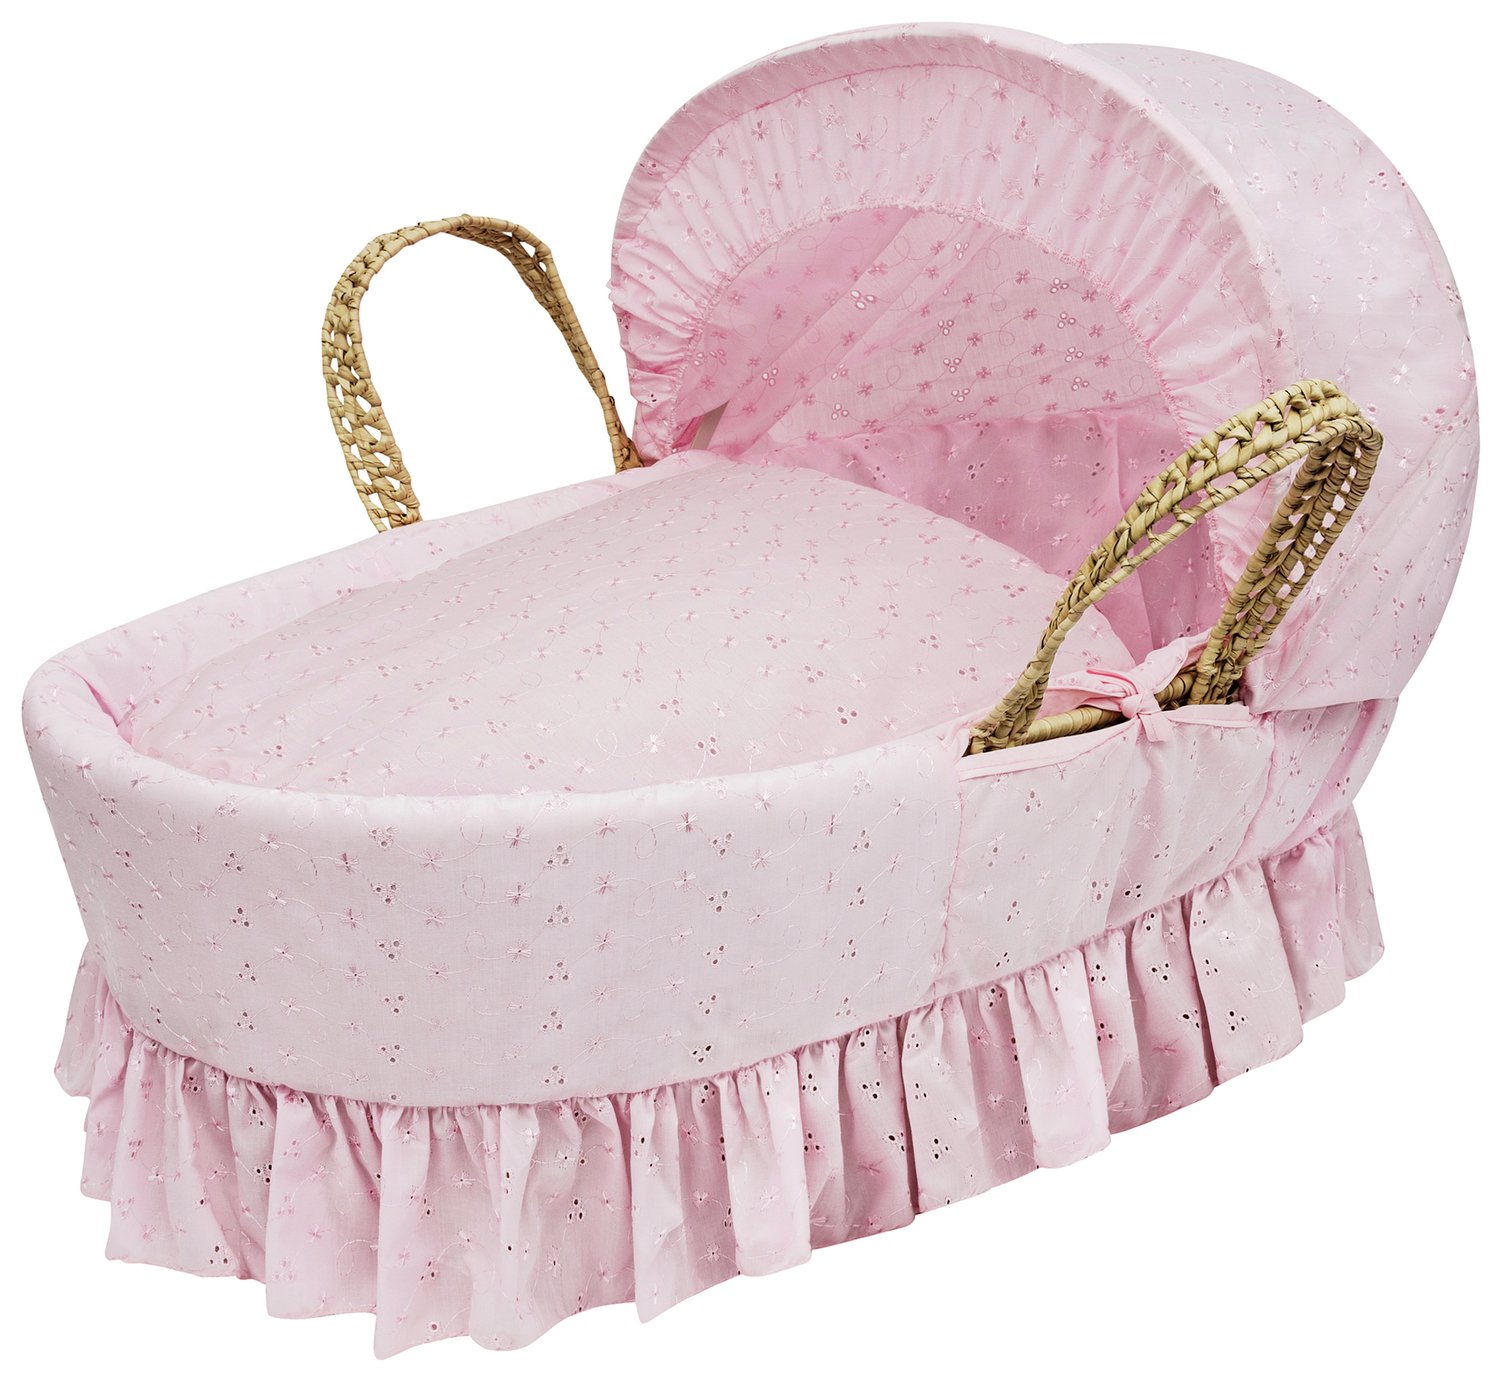 Personalised Embroidered Dolls Moses Basket Pink Broderie Anglaise Toy 